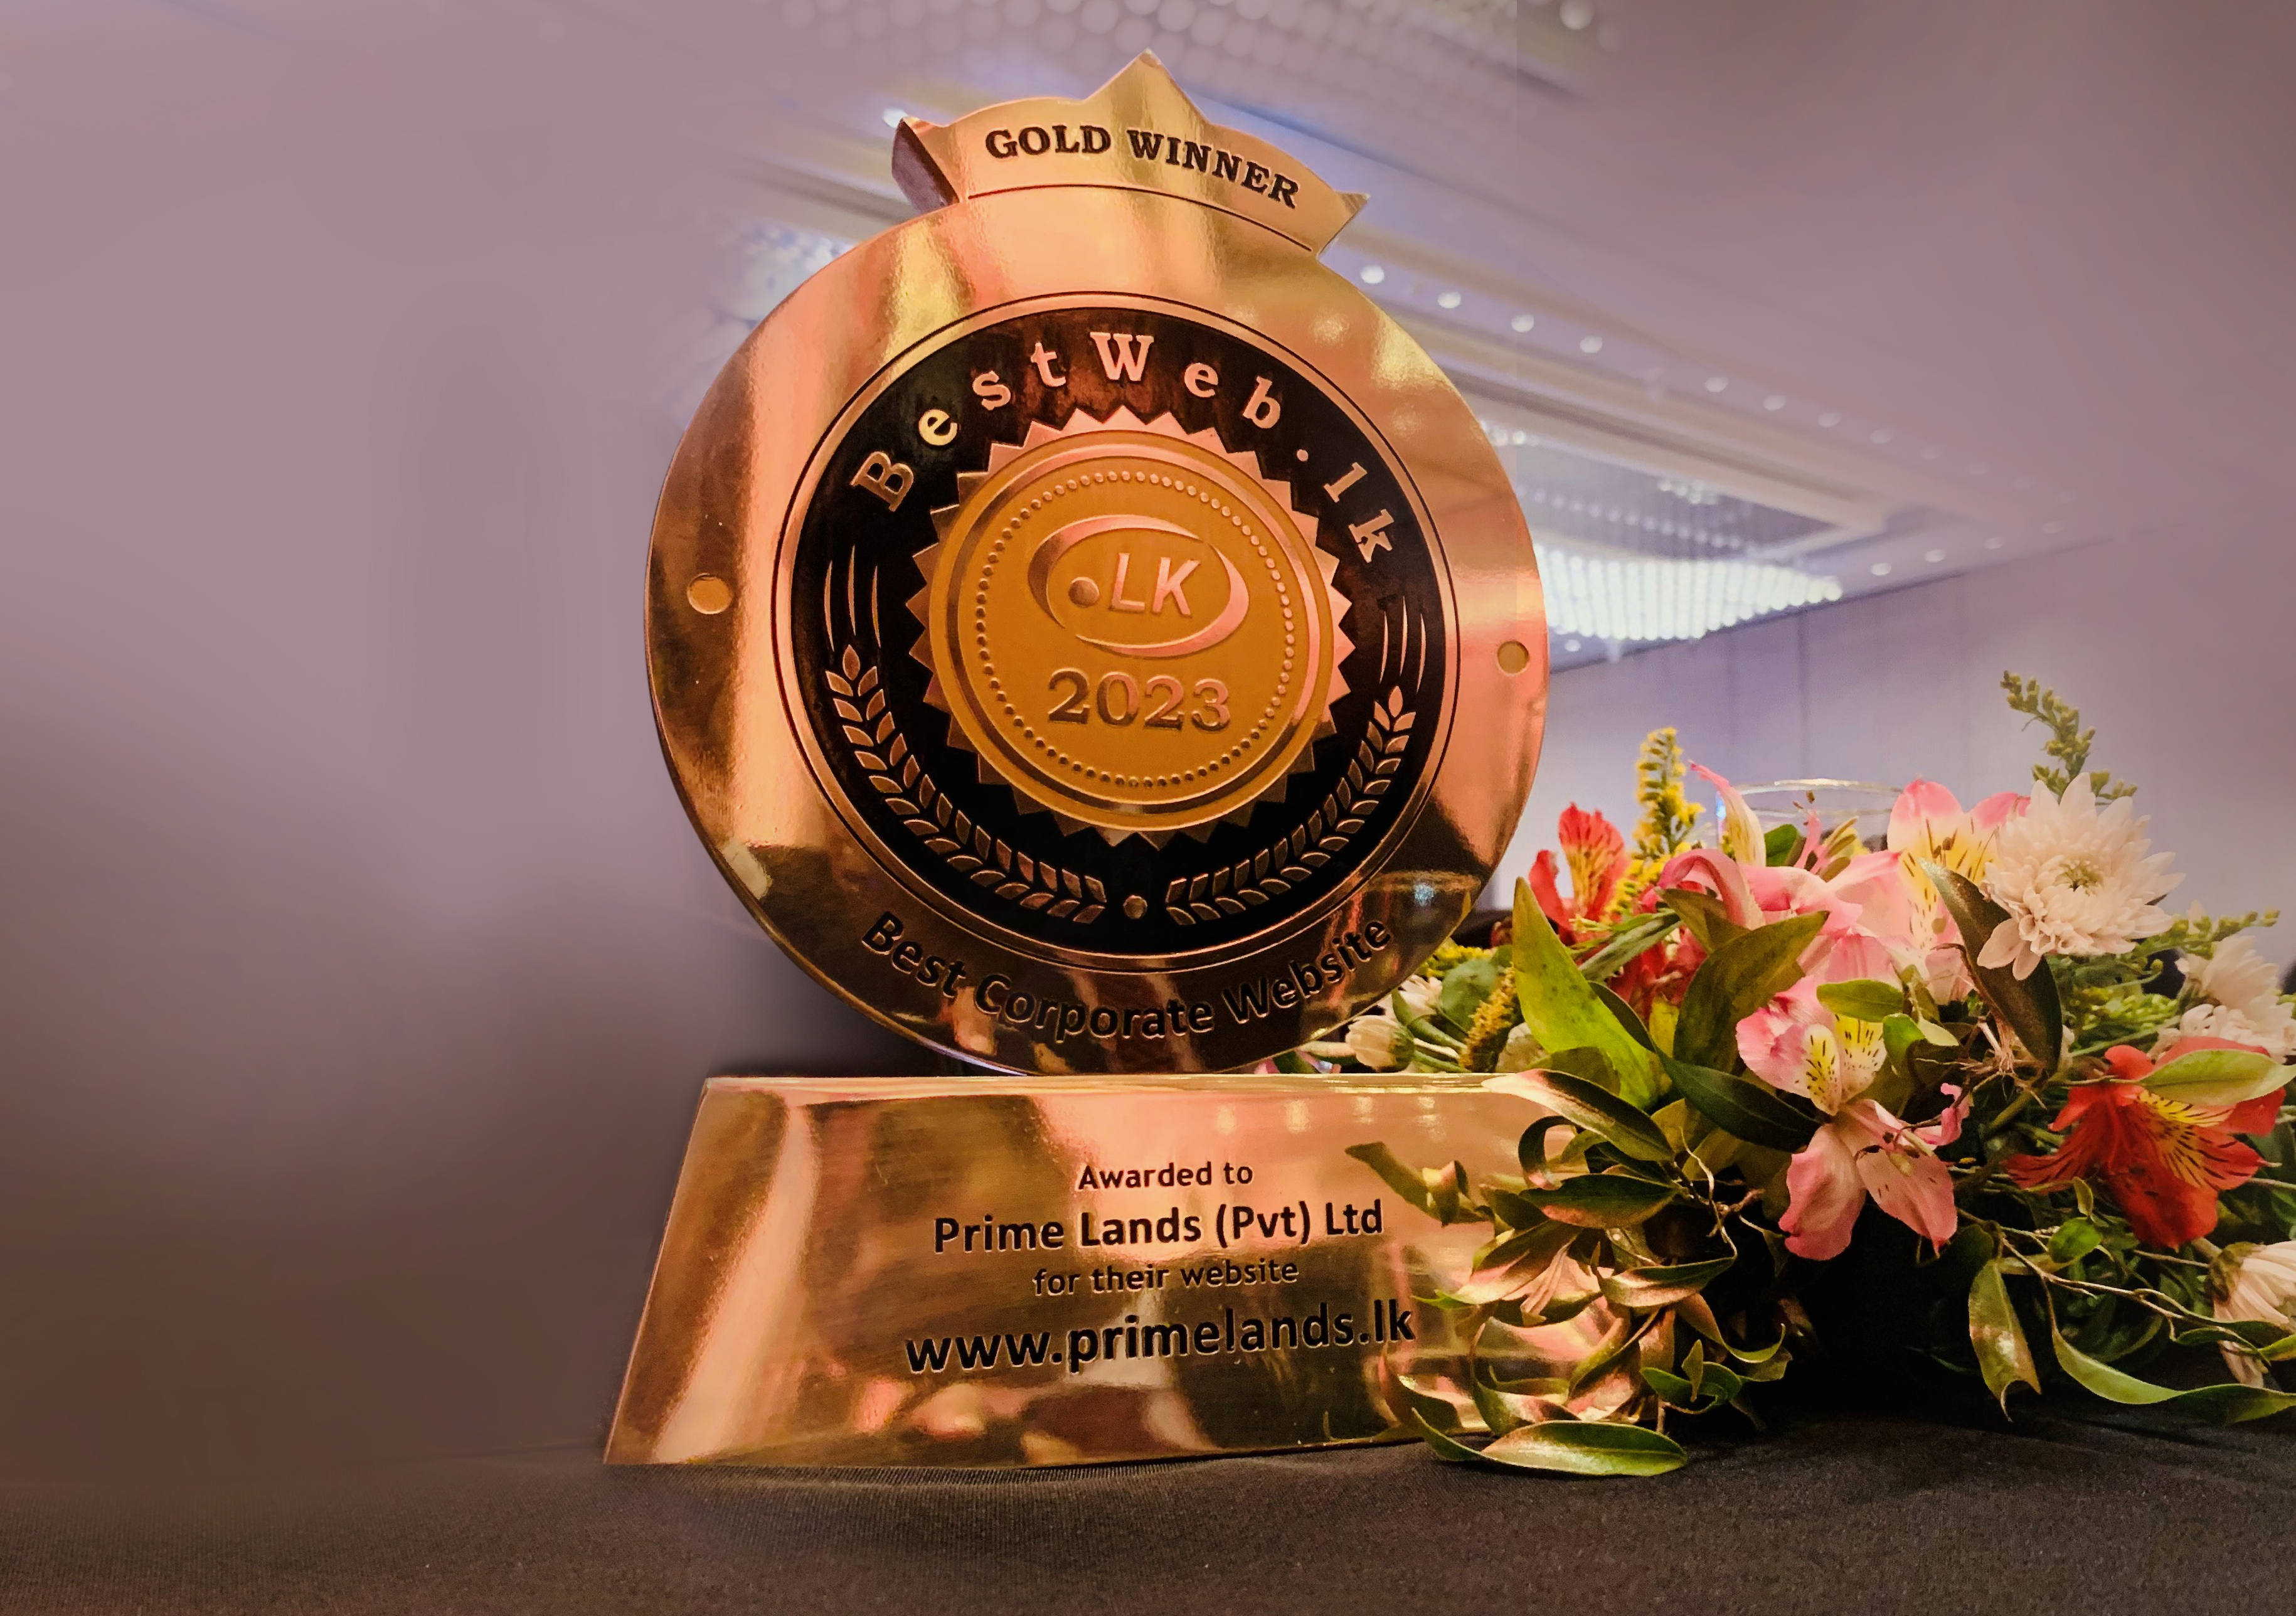 Prime-Lands-clinches-coveted-Gold-Award-for-elevated-online-presence-at-13th-BestWeb.lk-2023-Competition-for-02nd-Time